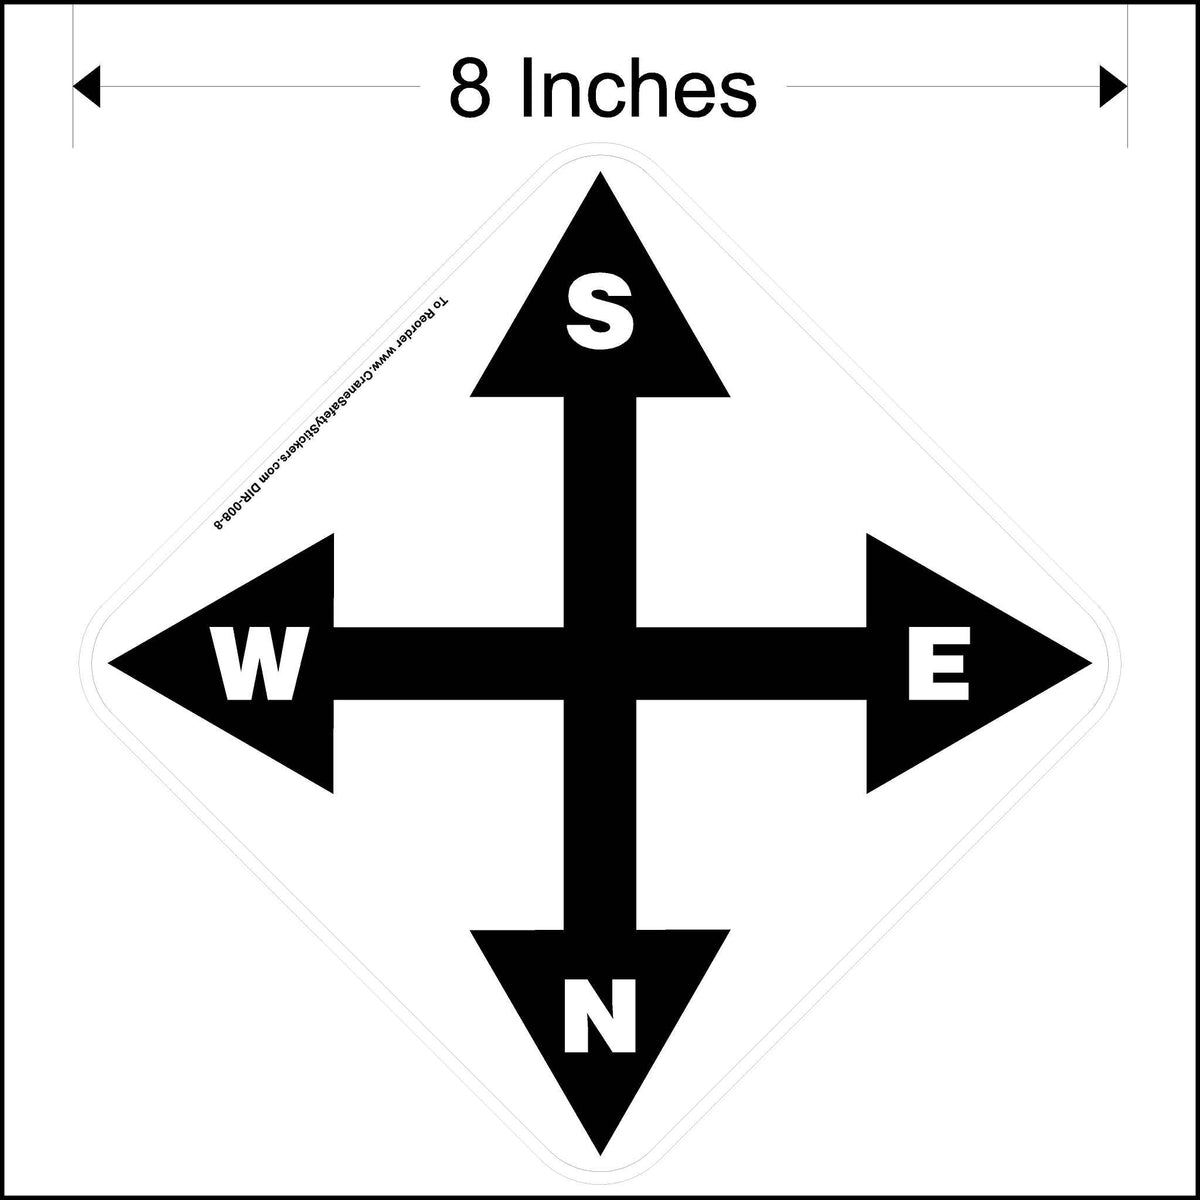 8 Inch South, east, north, and west overhead crane directional decal. Printed in black and white.